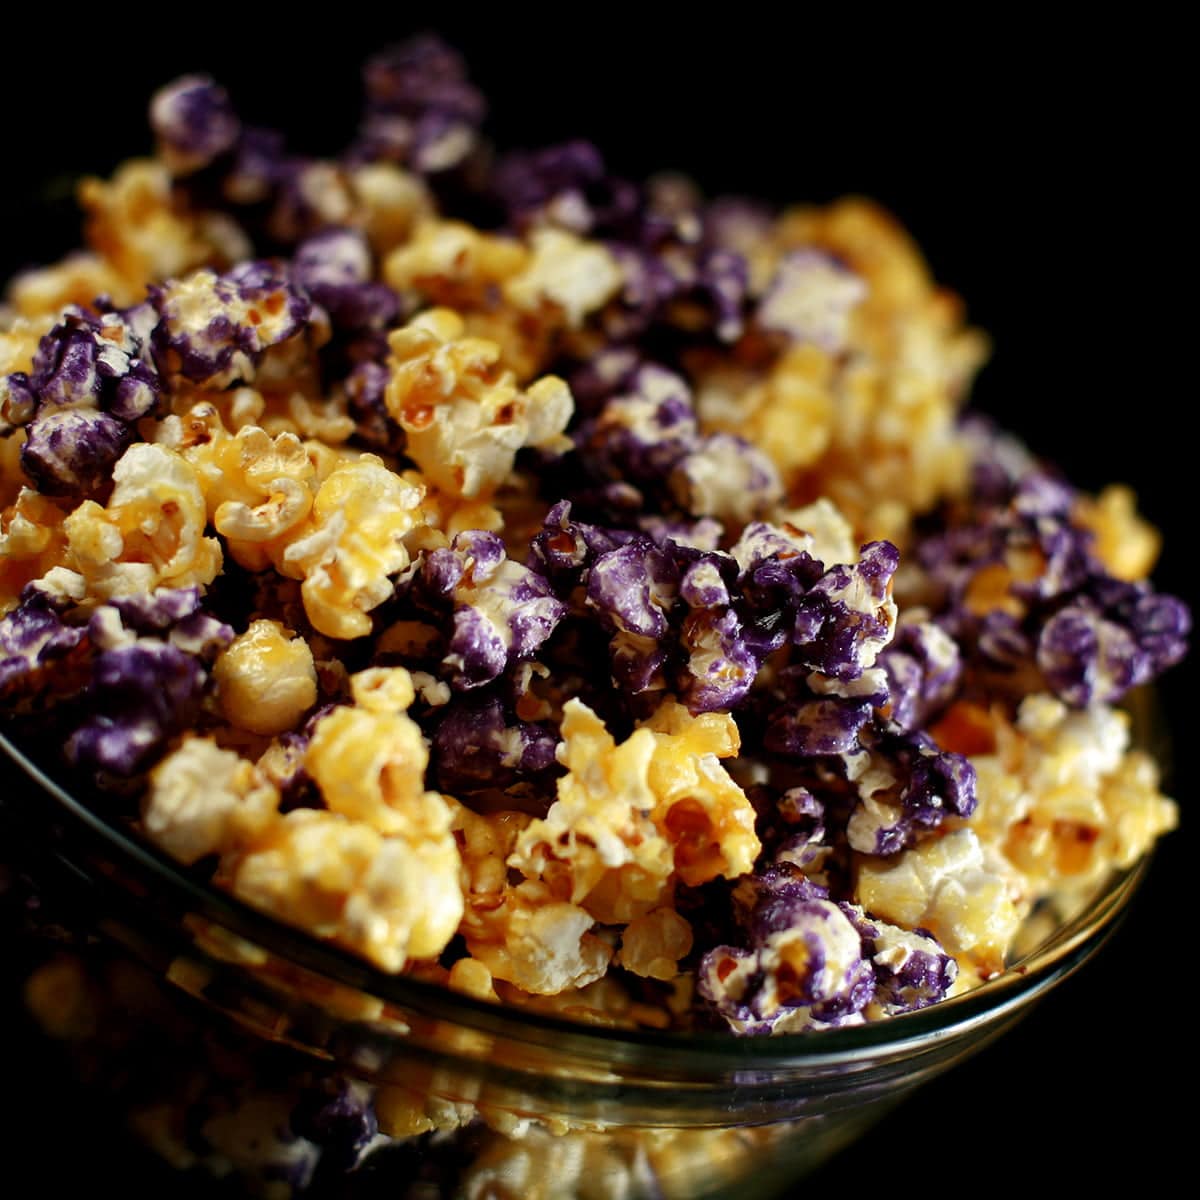 A close up view of a bowl of candy popcorn. The game day popcorn is yellow and purple, themed around a sports team.